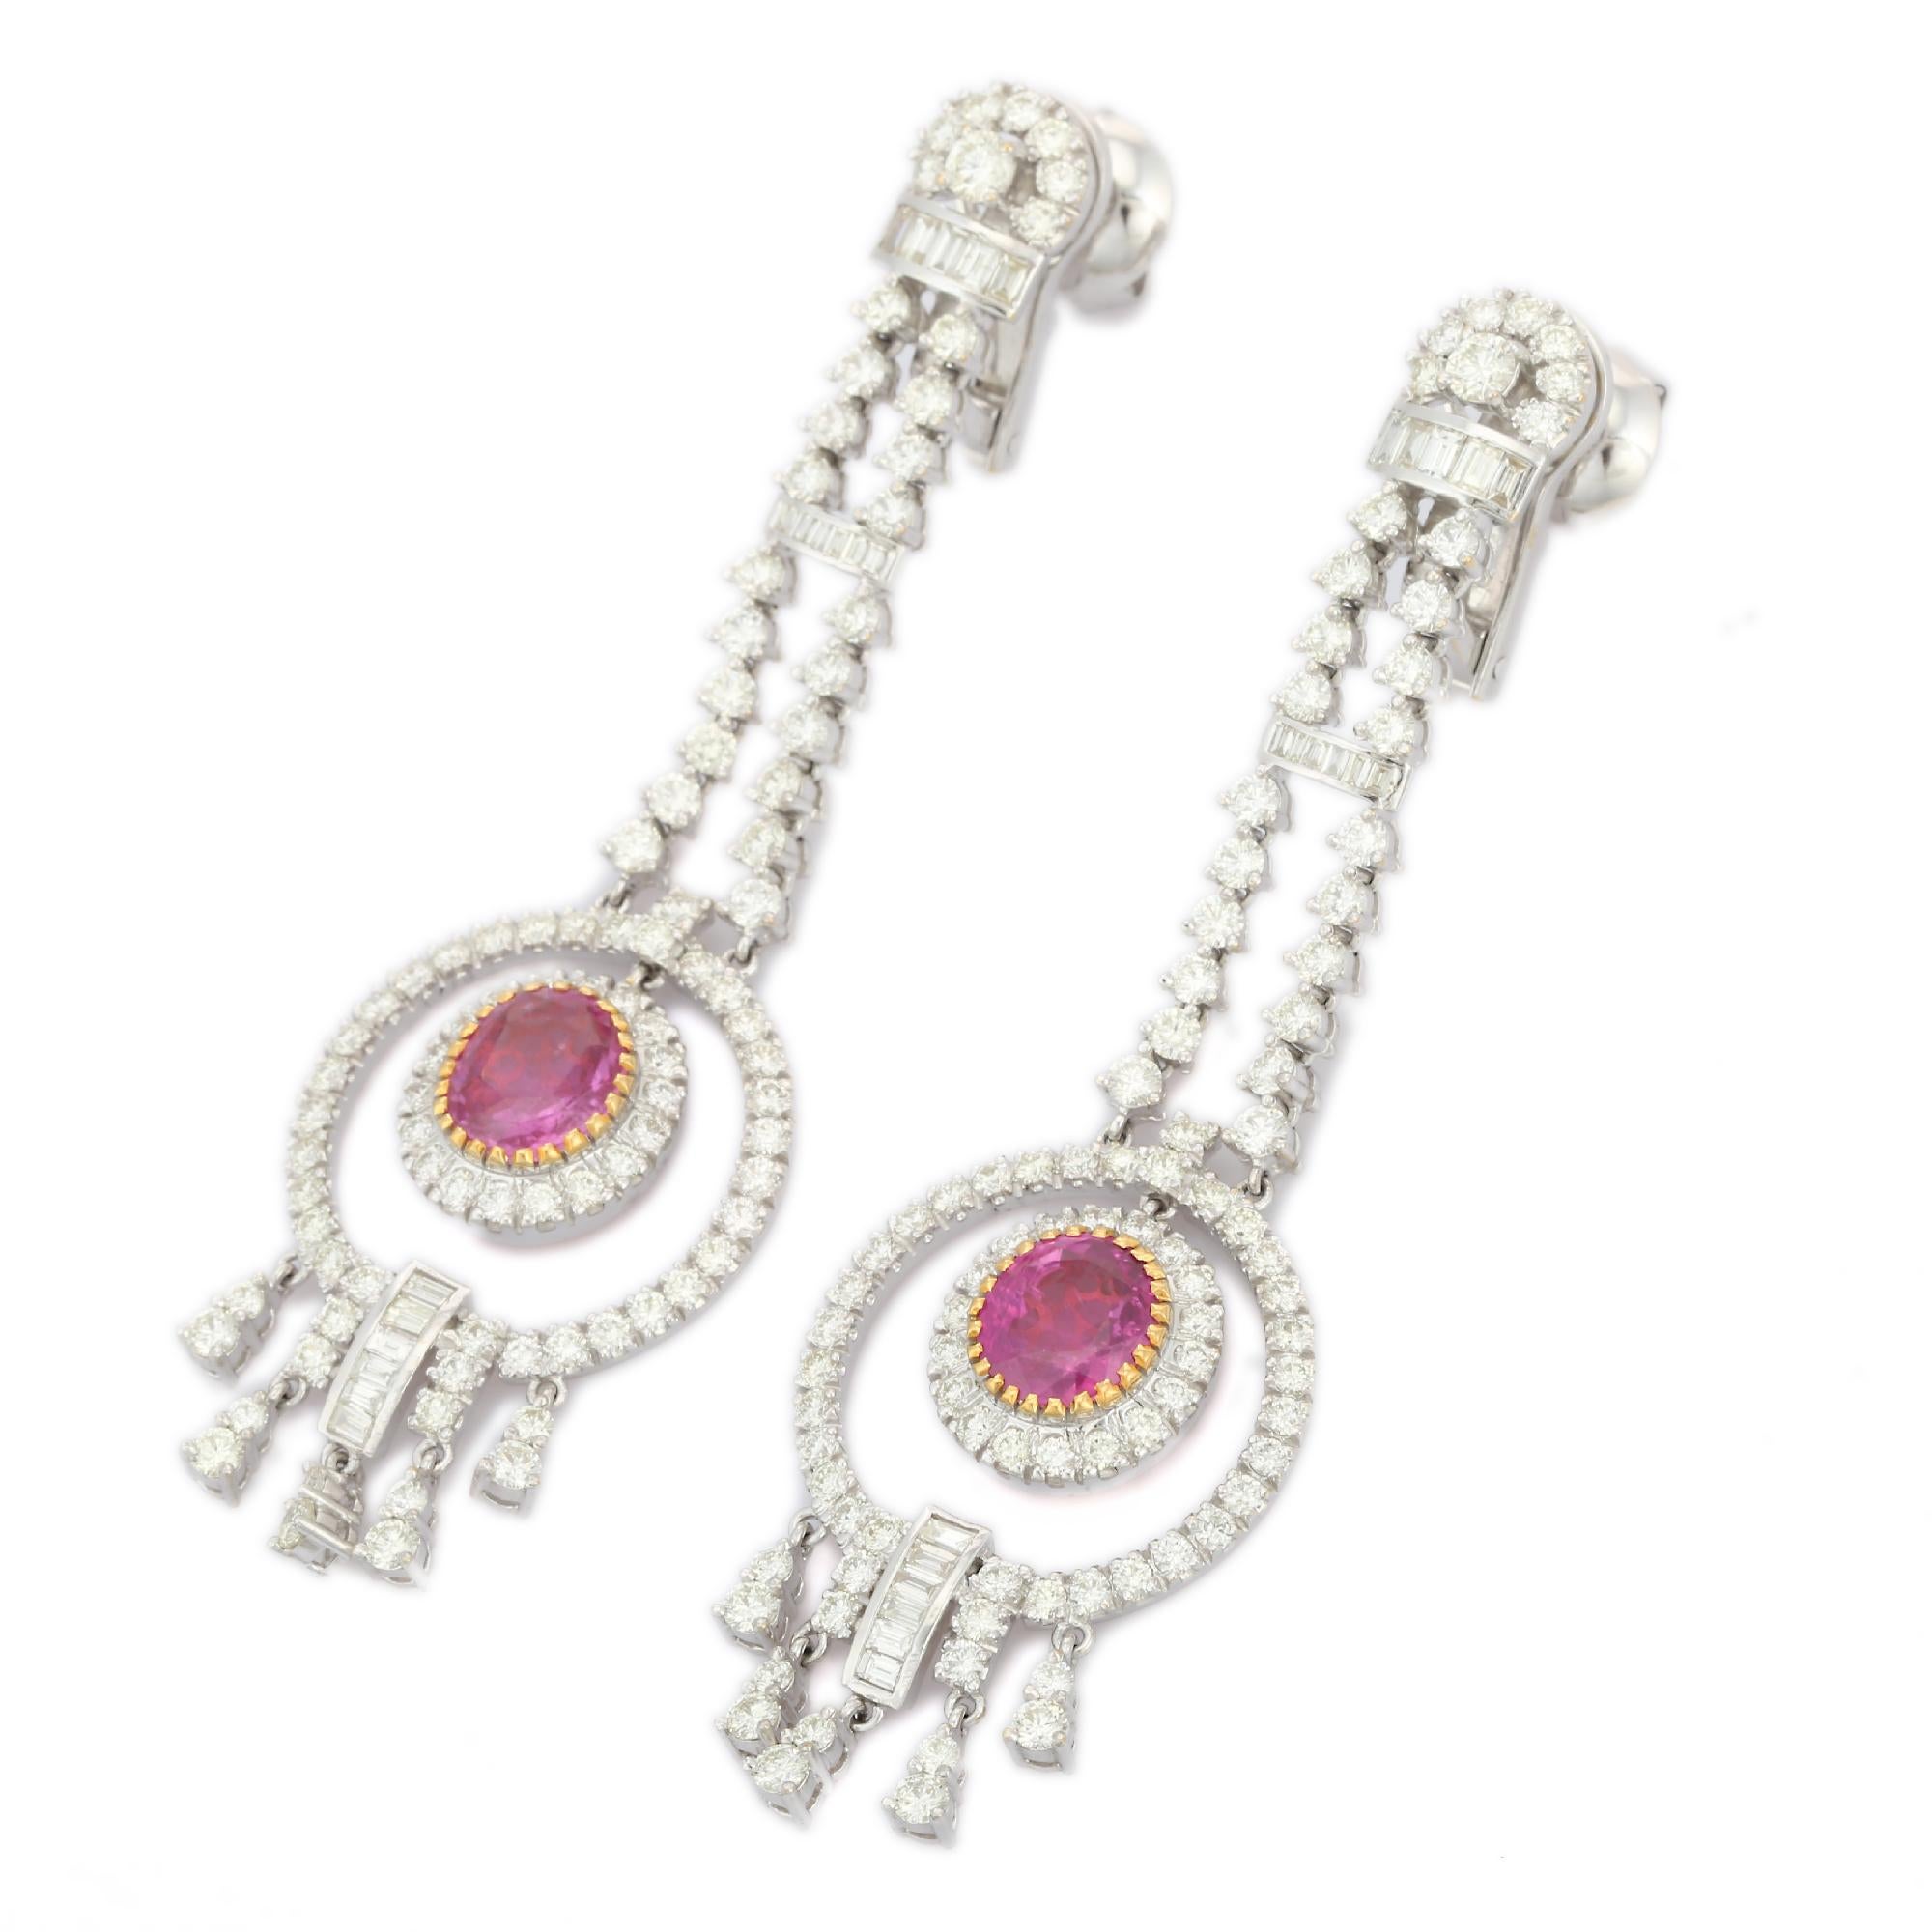 Glamorous Diamond Ruby Dangle Earrings in 18K Gold to make a statement with your look. You shall need statement dangle earrings to make a statement with your look. These earrings create a sparkling, luxurious look featuring round cut rubies.
Ruby